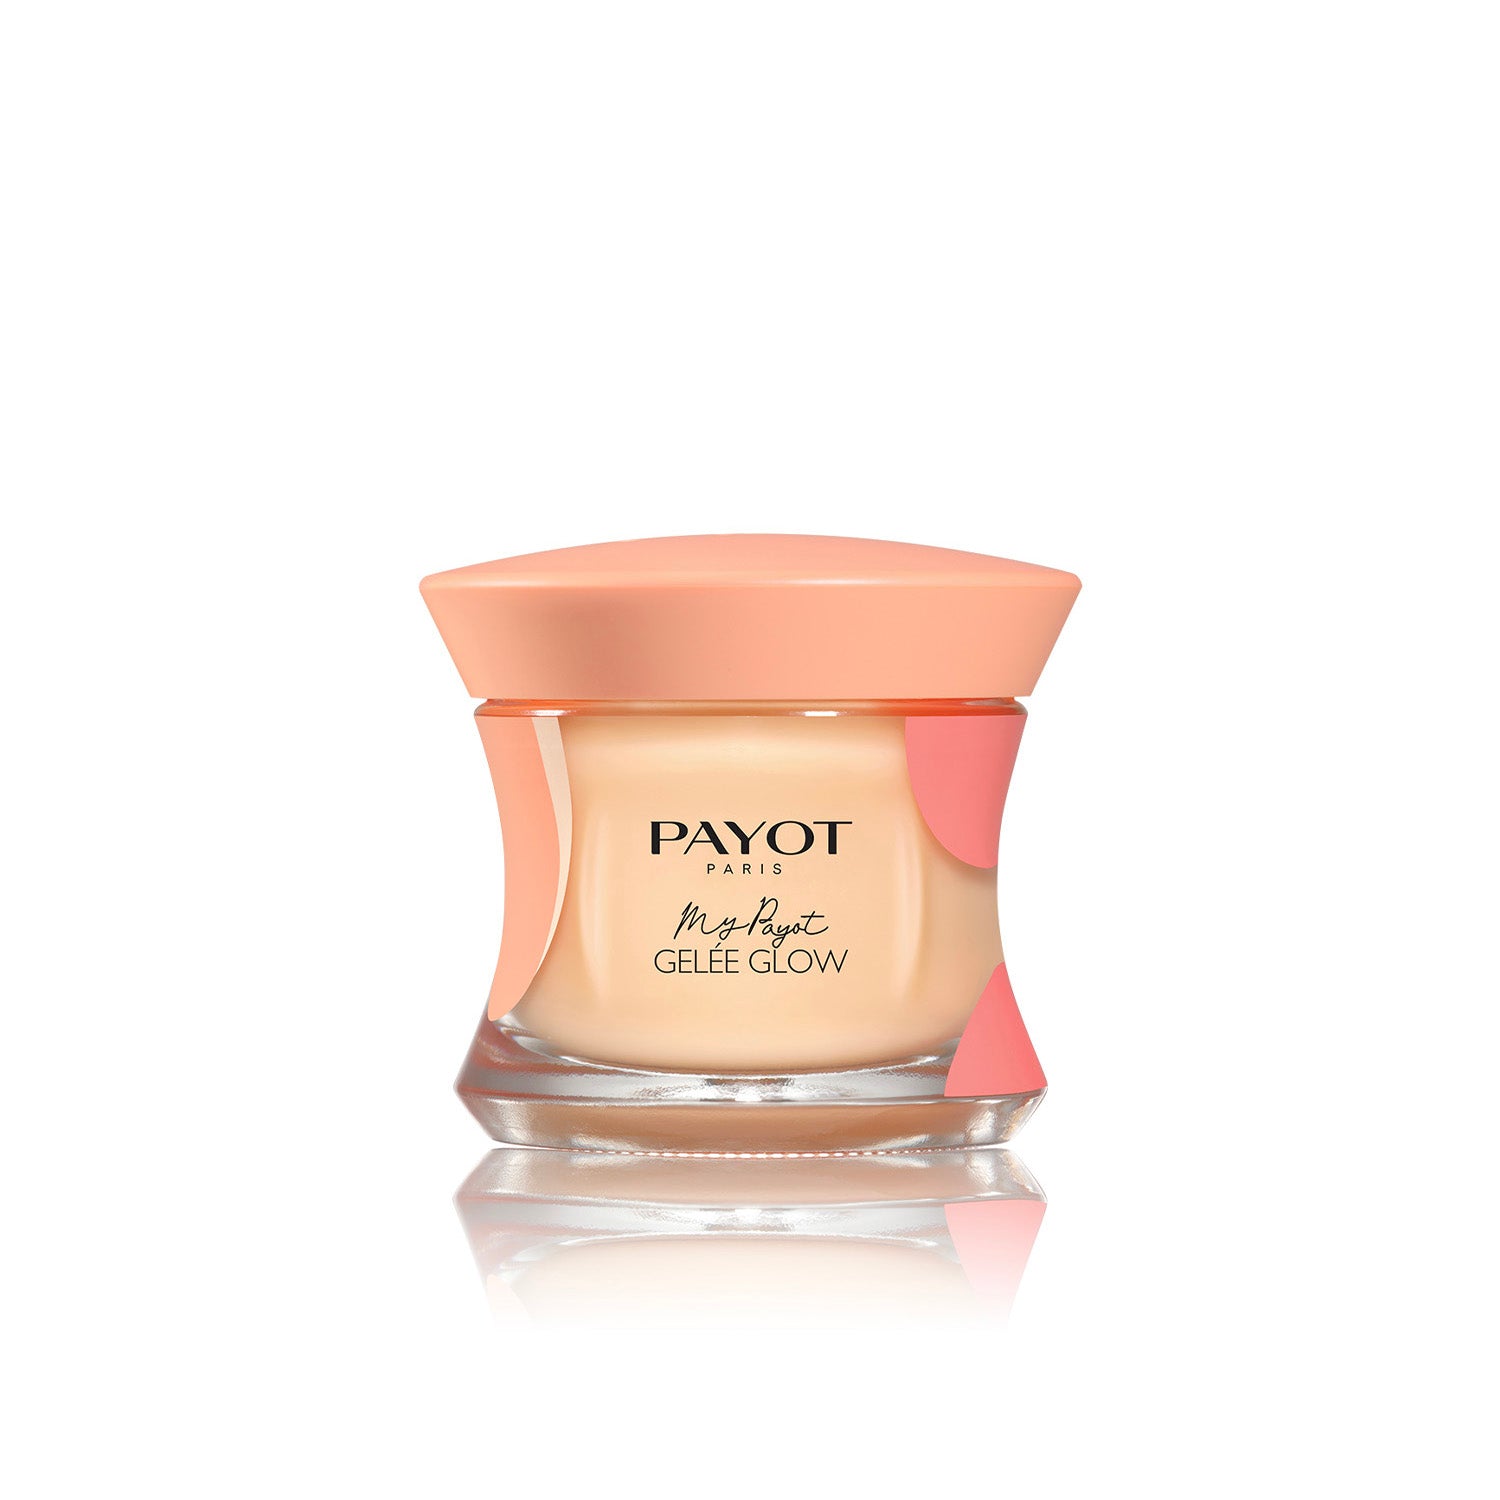 PV My Payot Gelee Glow 50ml